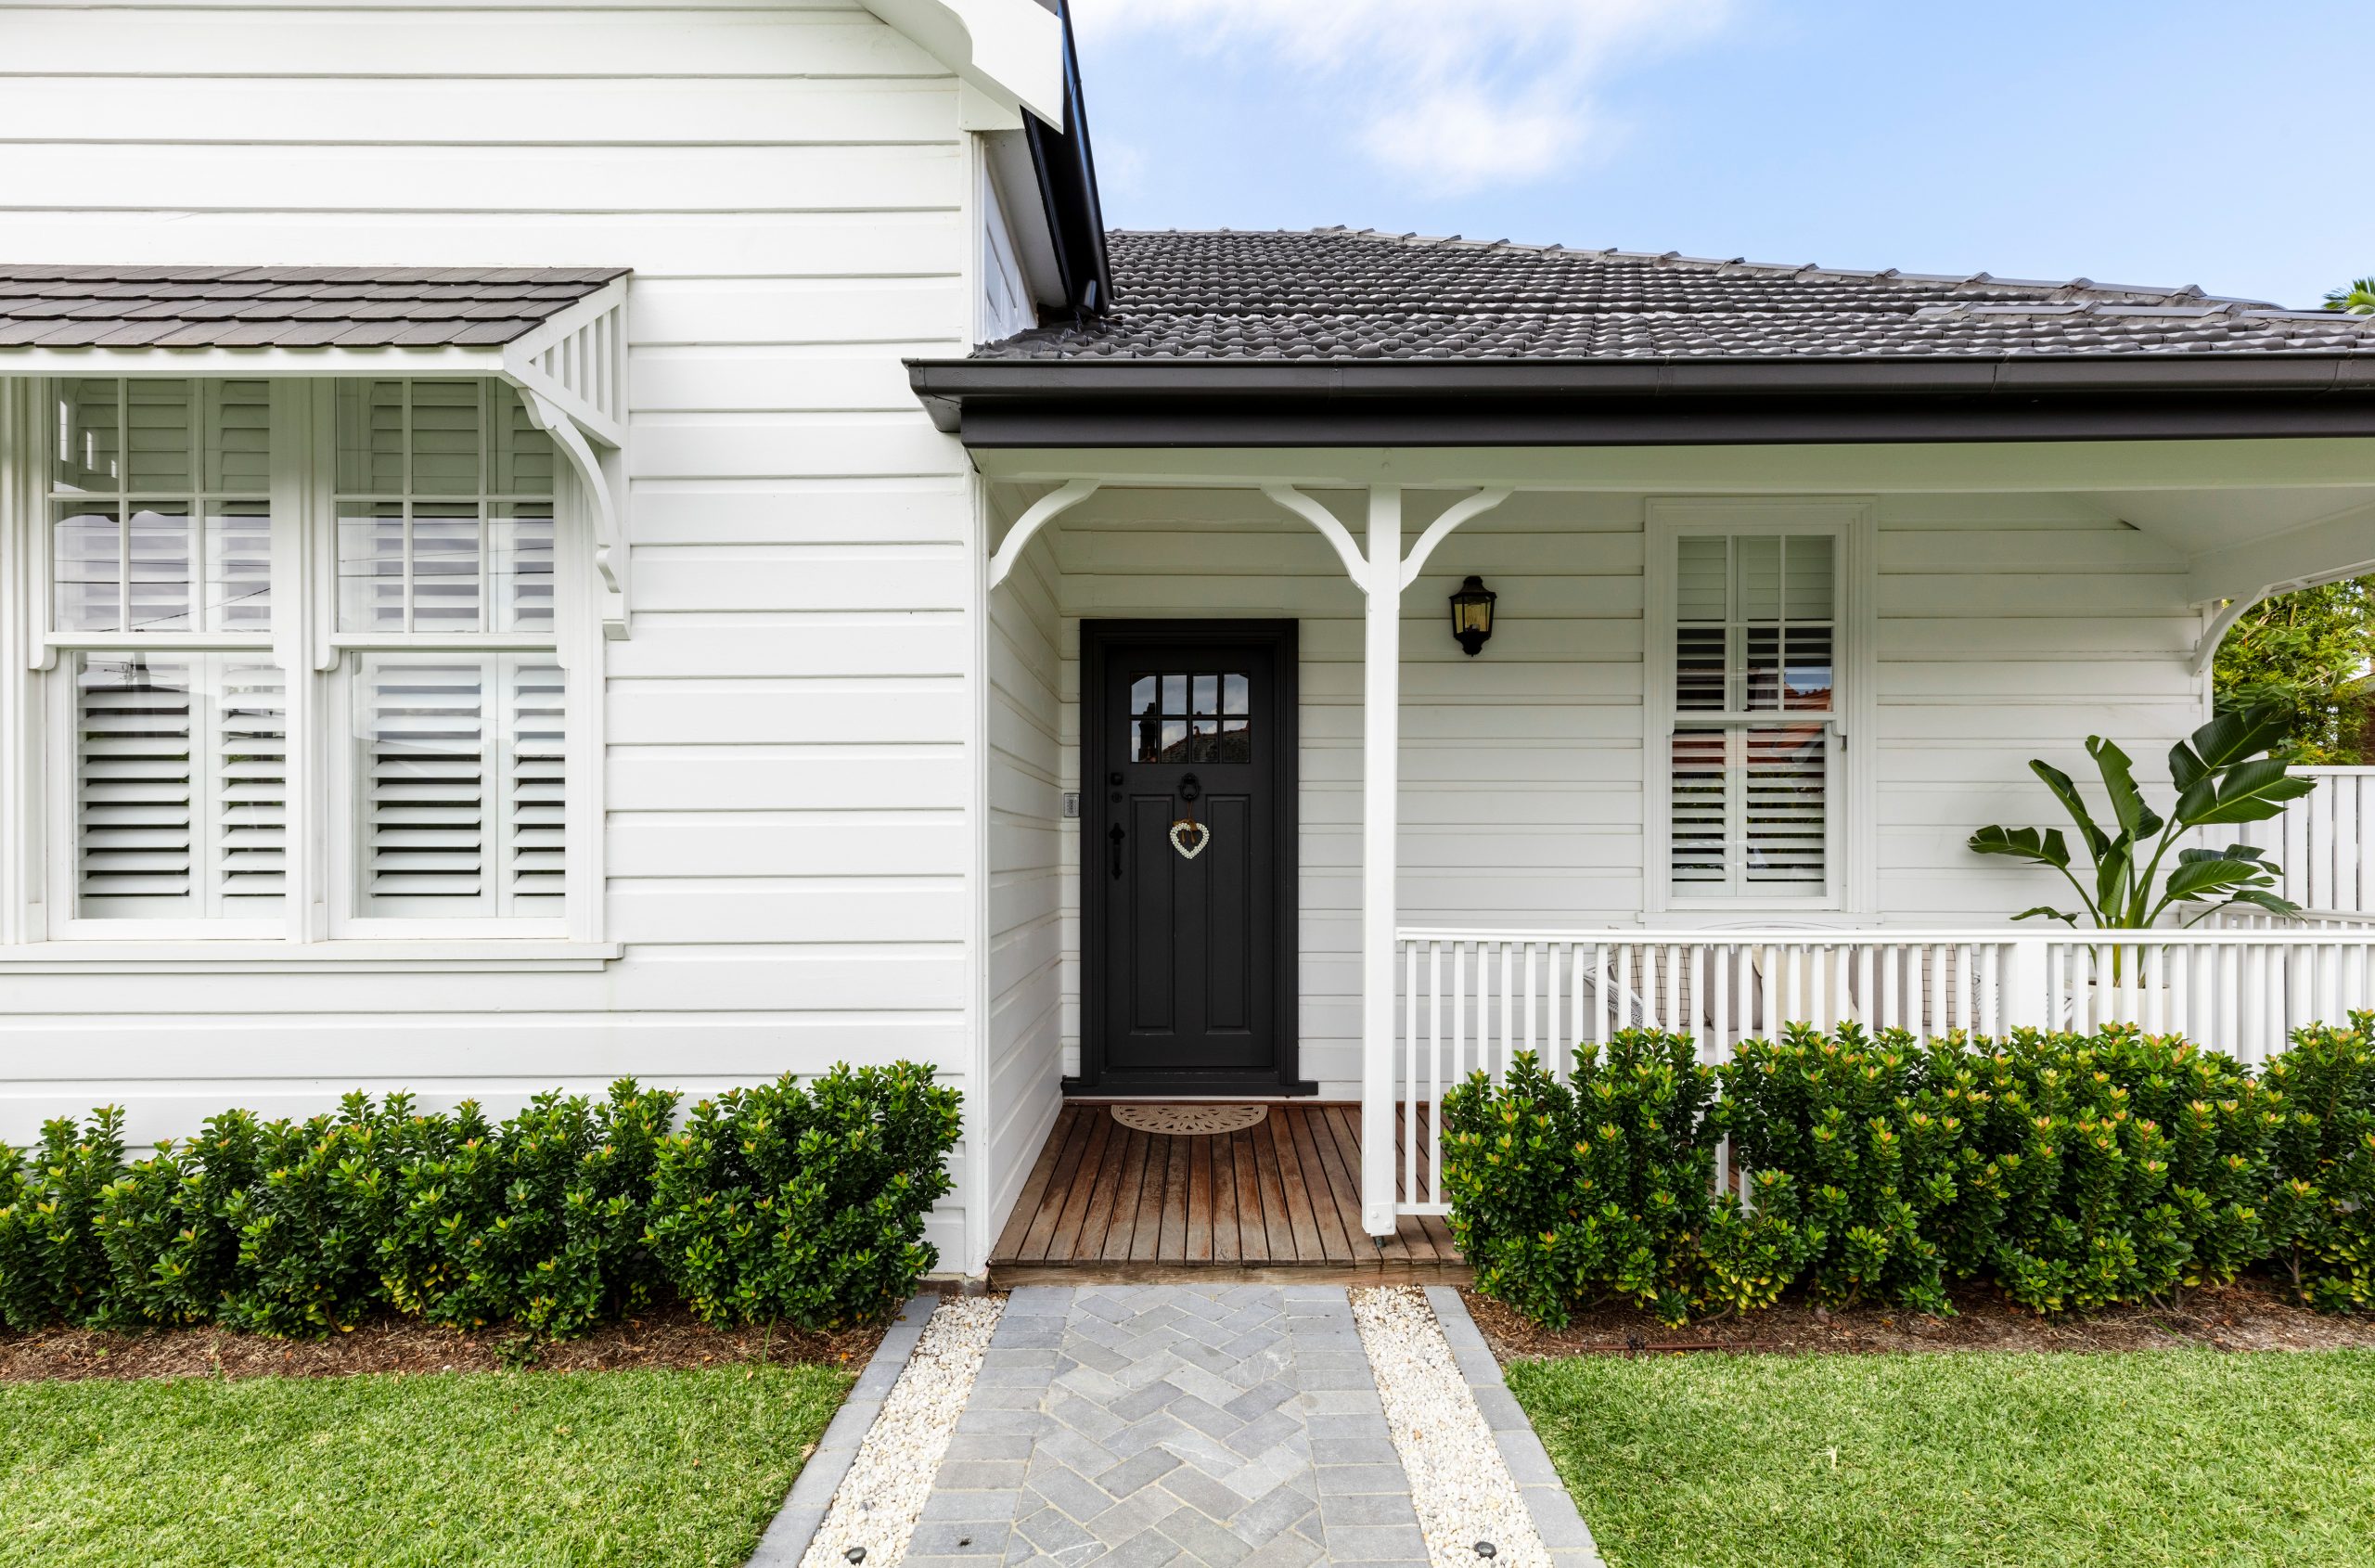 , How to improve the kerb appeal of your home